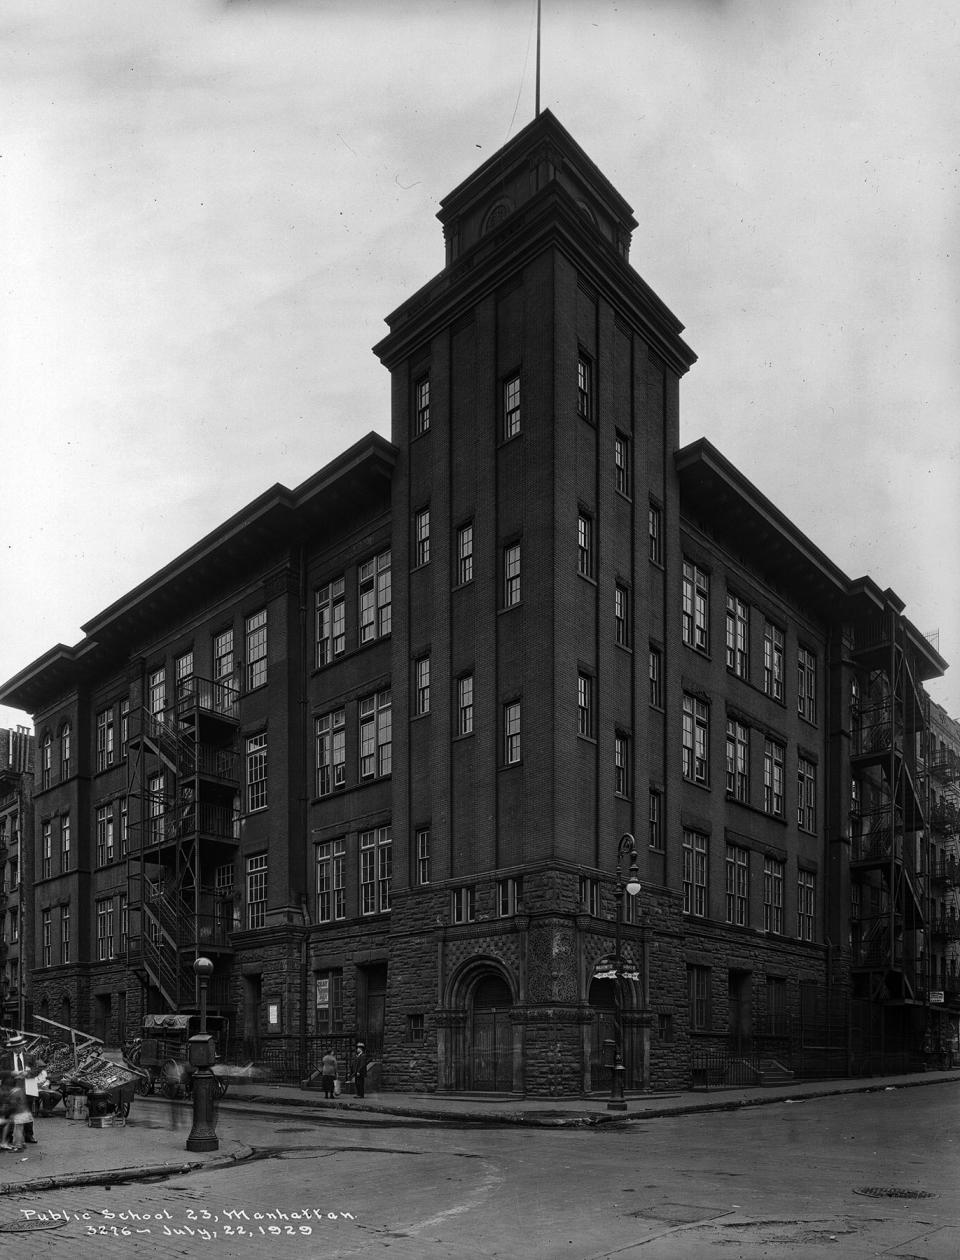 Image: The more than a century old structure is the only city-owned property in Chinatown occupied entirely by nonprofits. (NYC Board of Education Collection / NYC Municipal Archives)